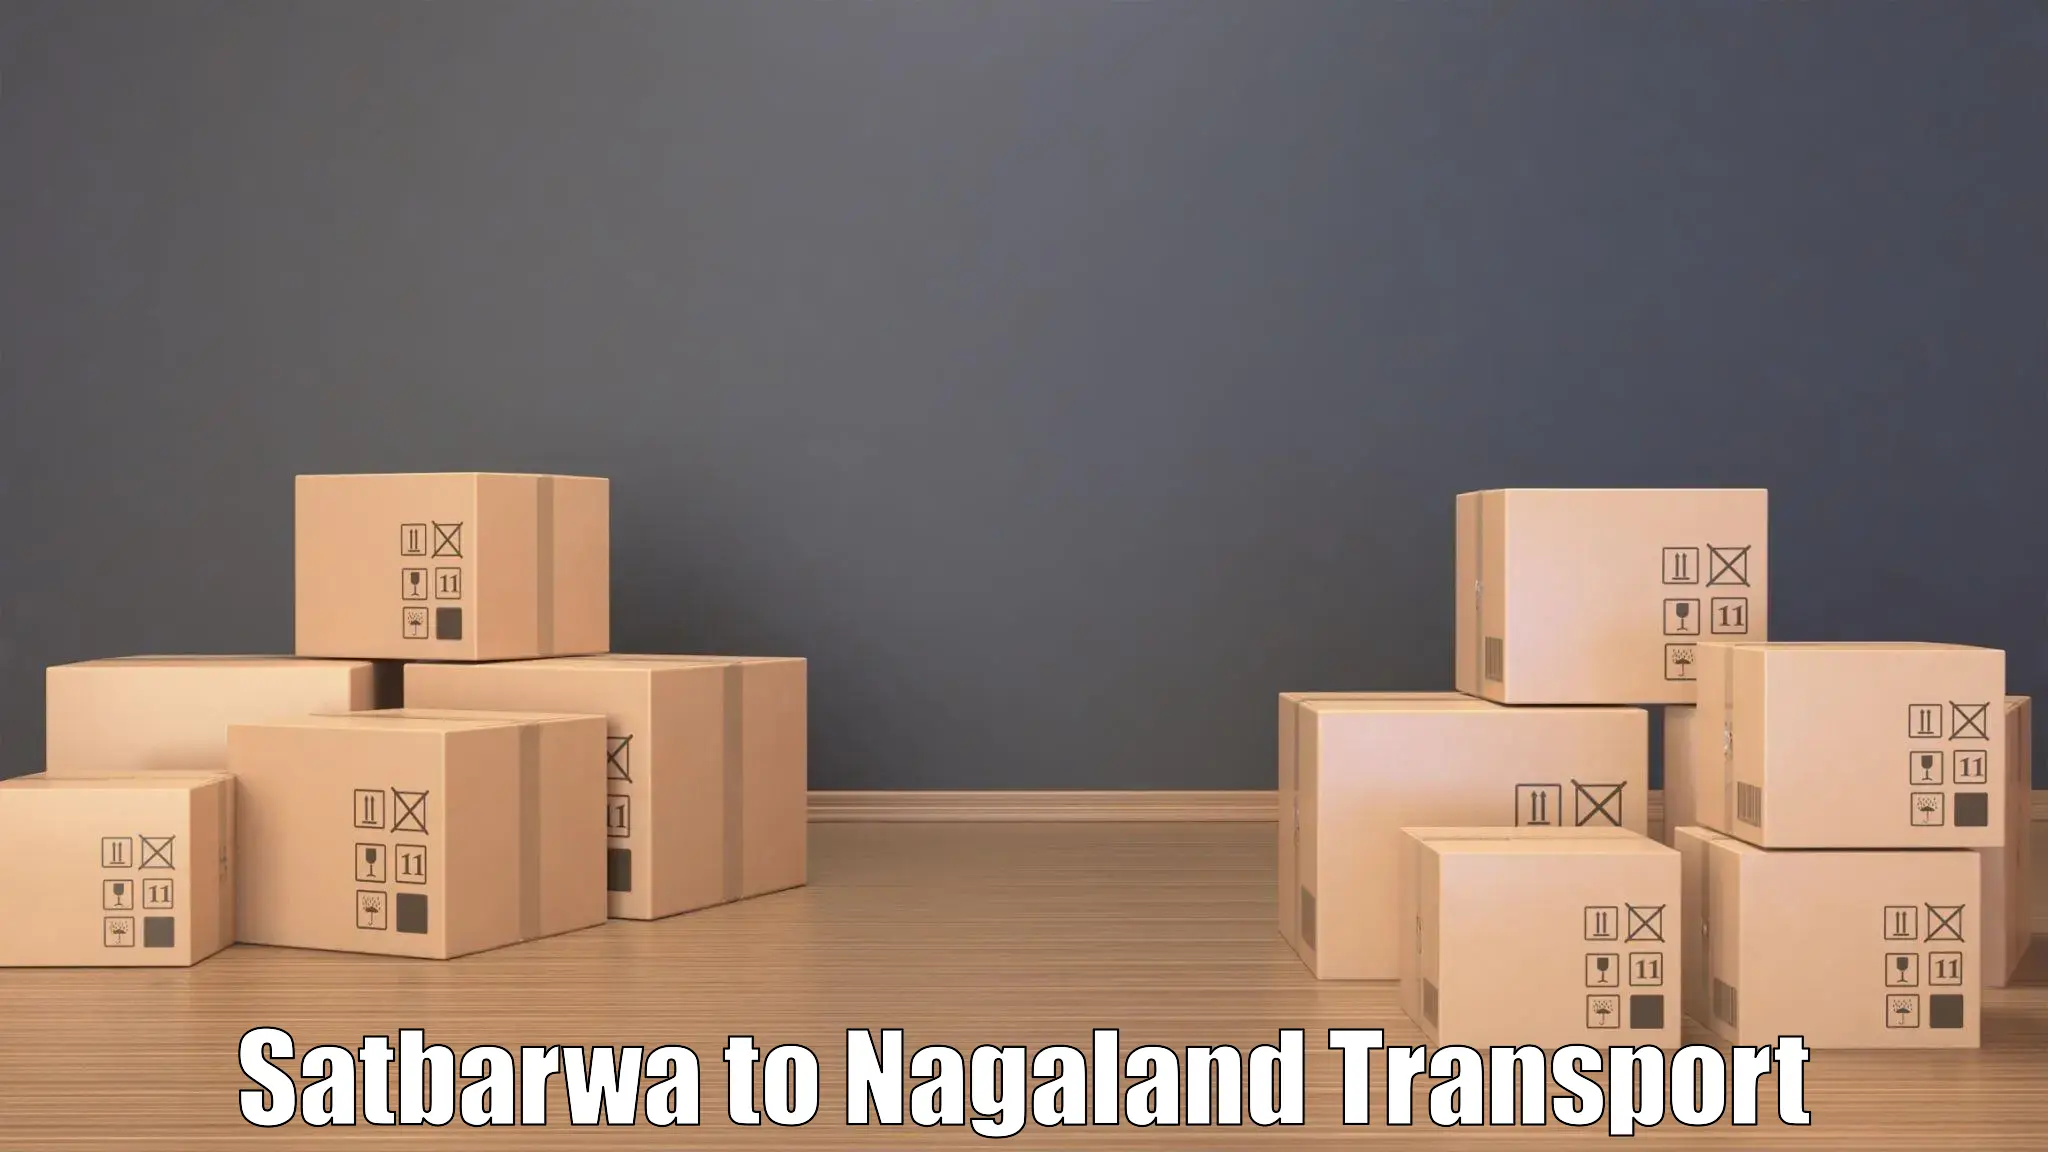 Goods delivery service Satbarwa to Nagaland